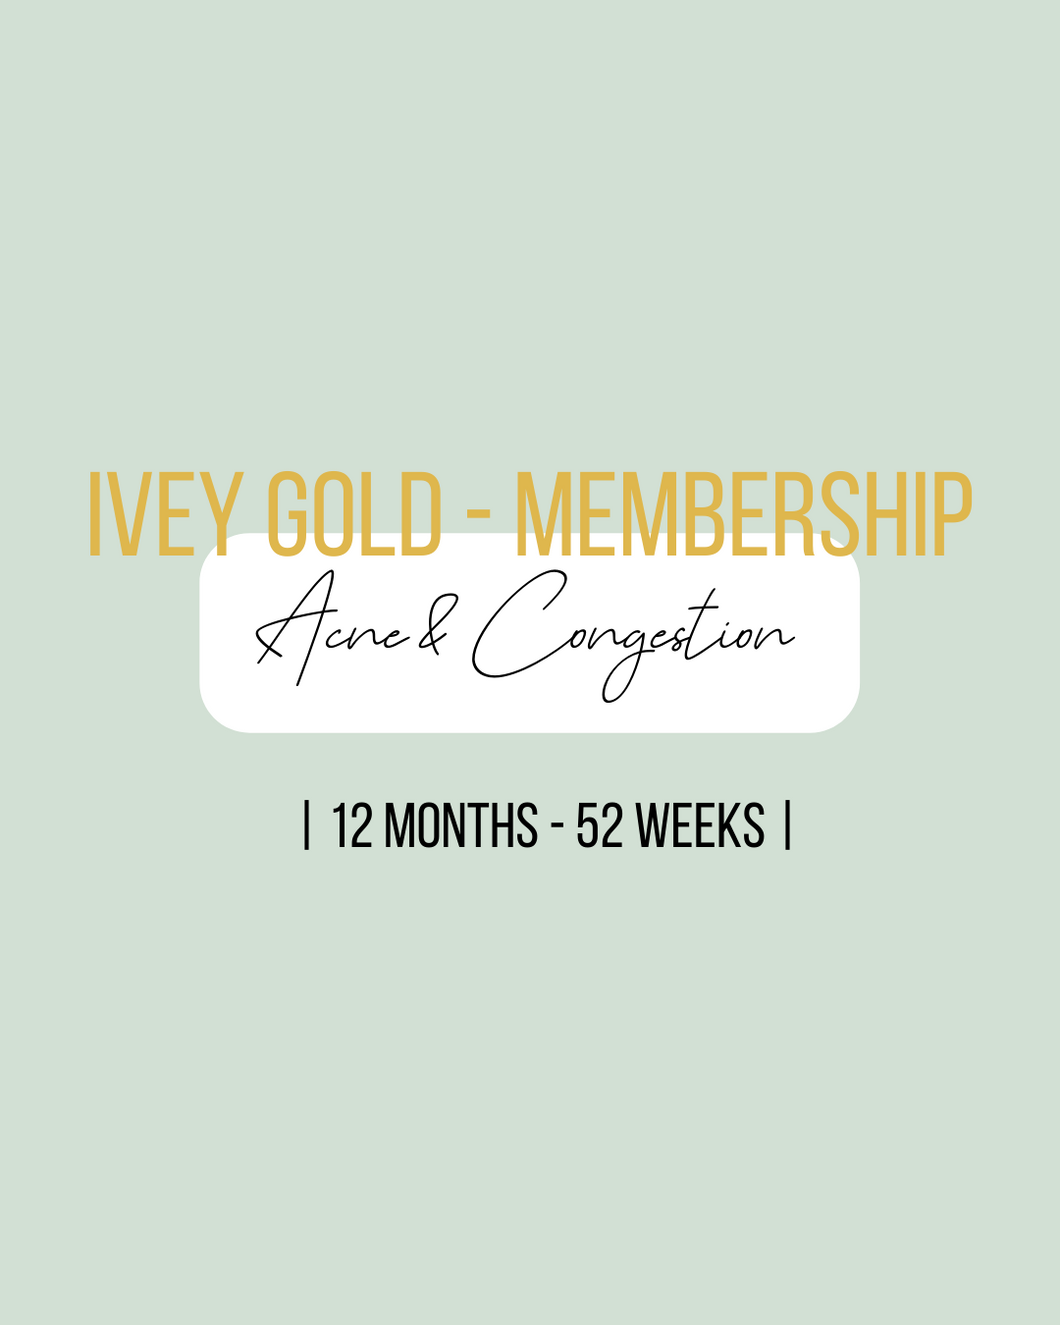 Acne & Congestion Membership 12 Months